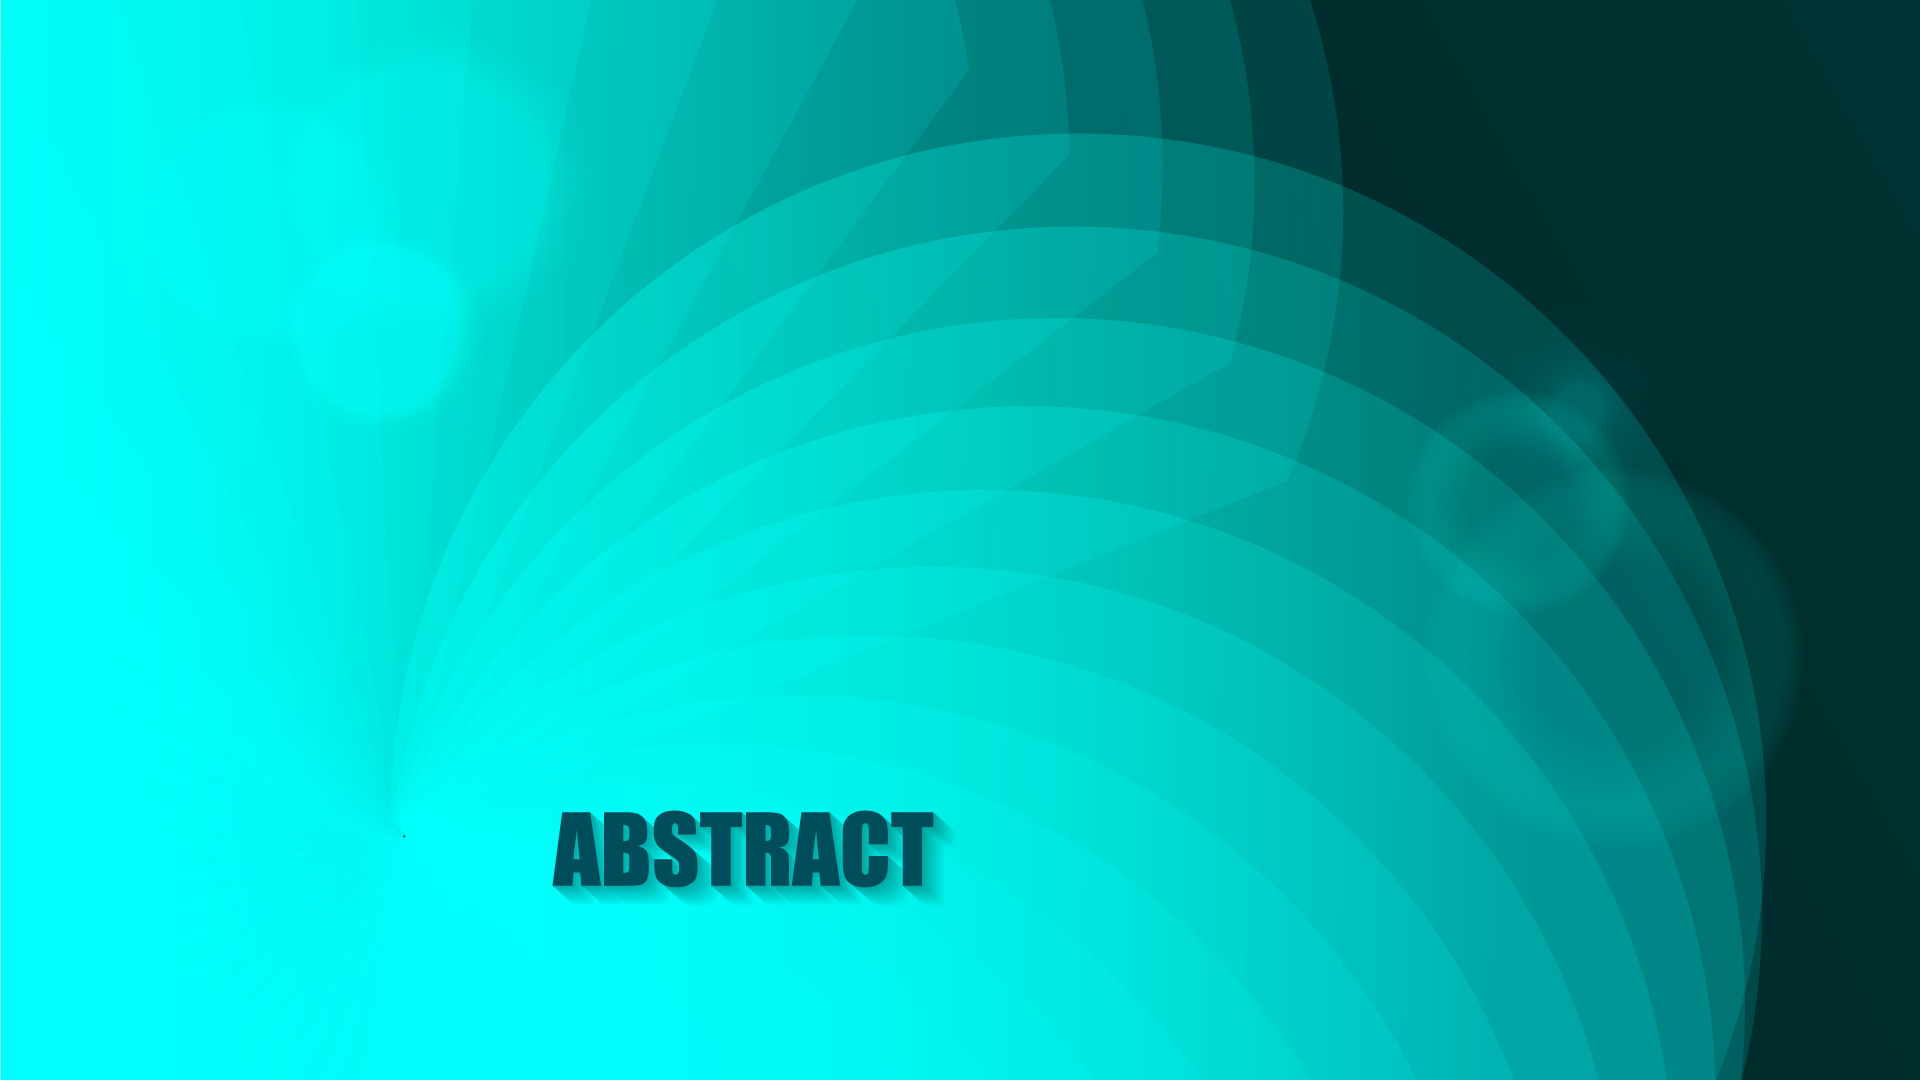 Blue and green abstract background with the word abstract.